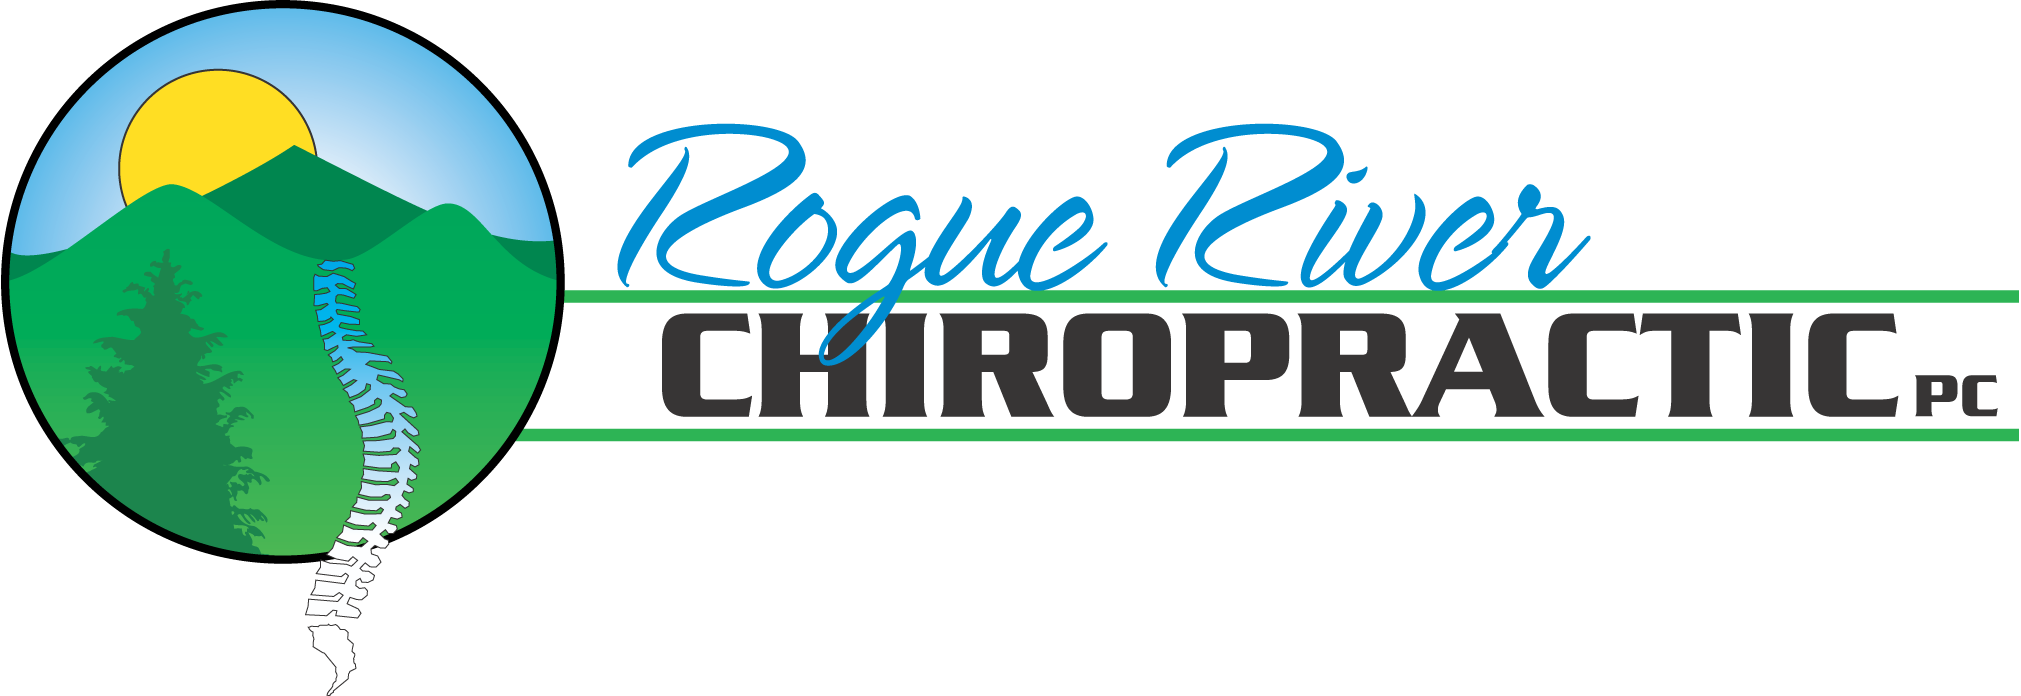 Rogue River Chiropractic